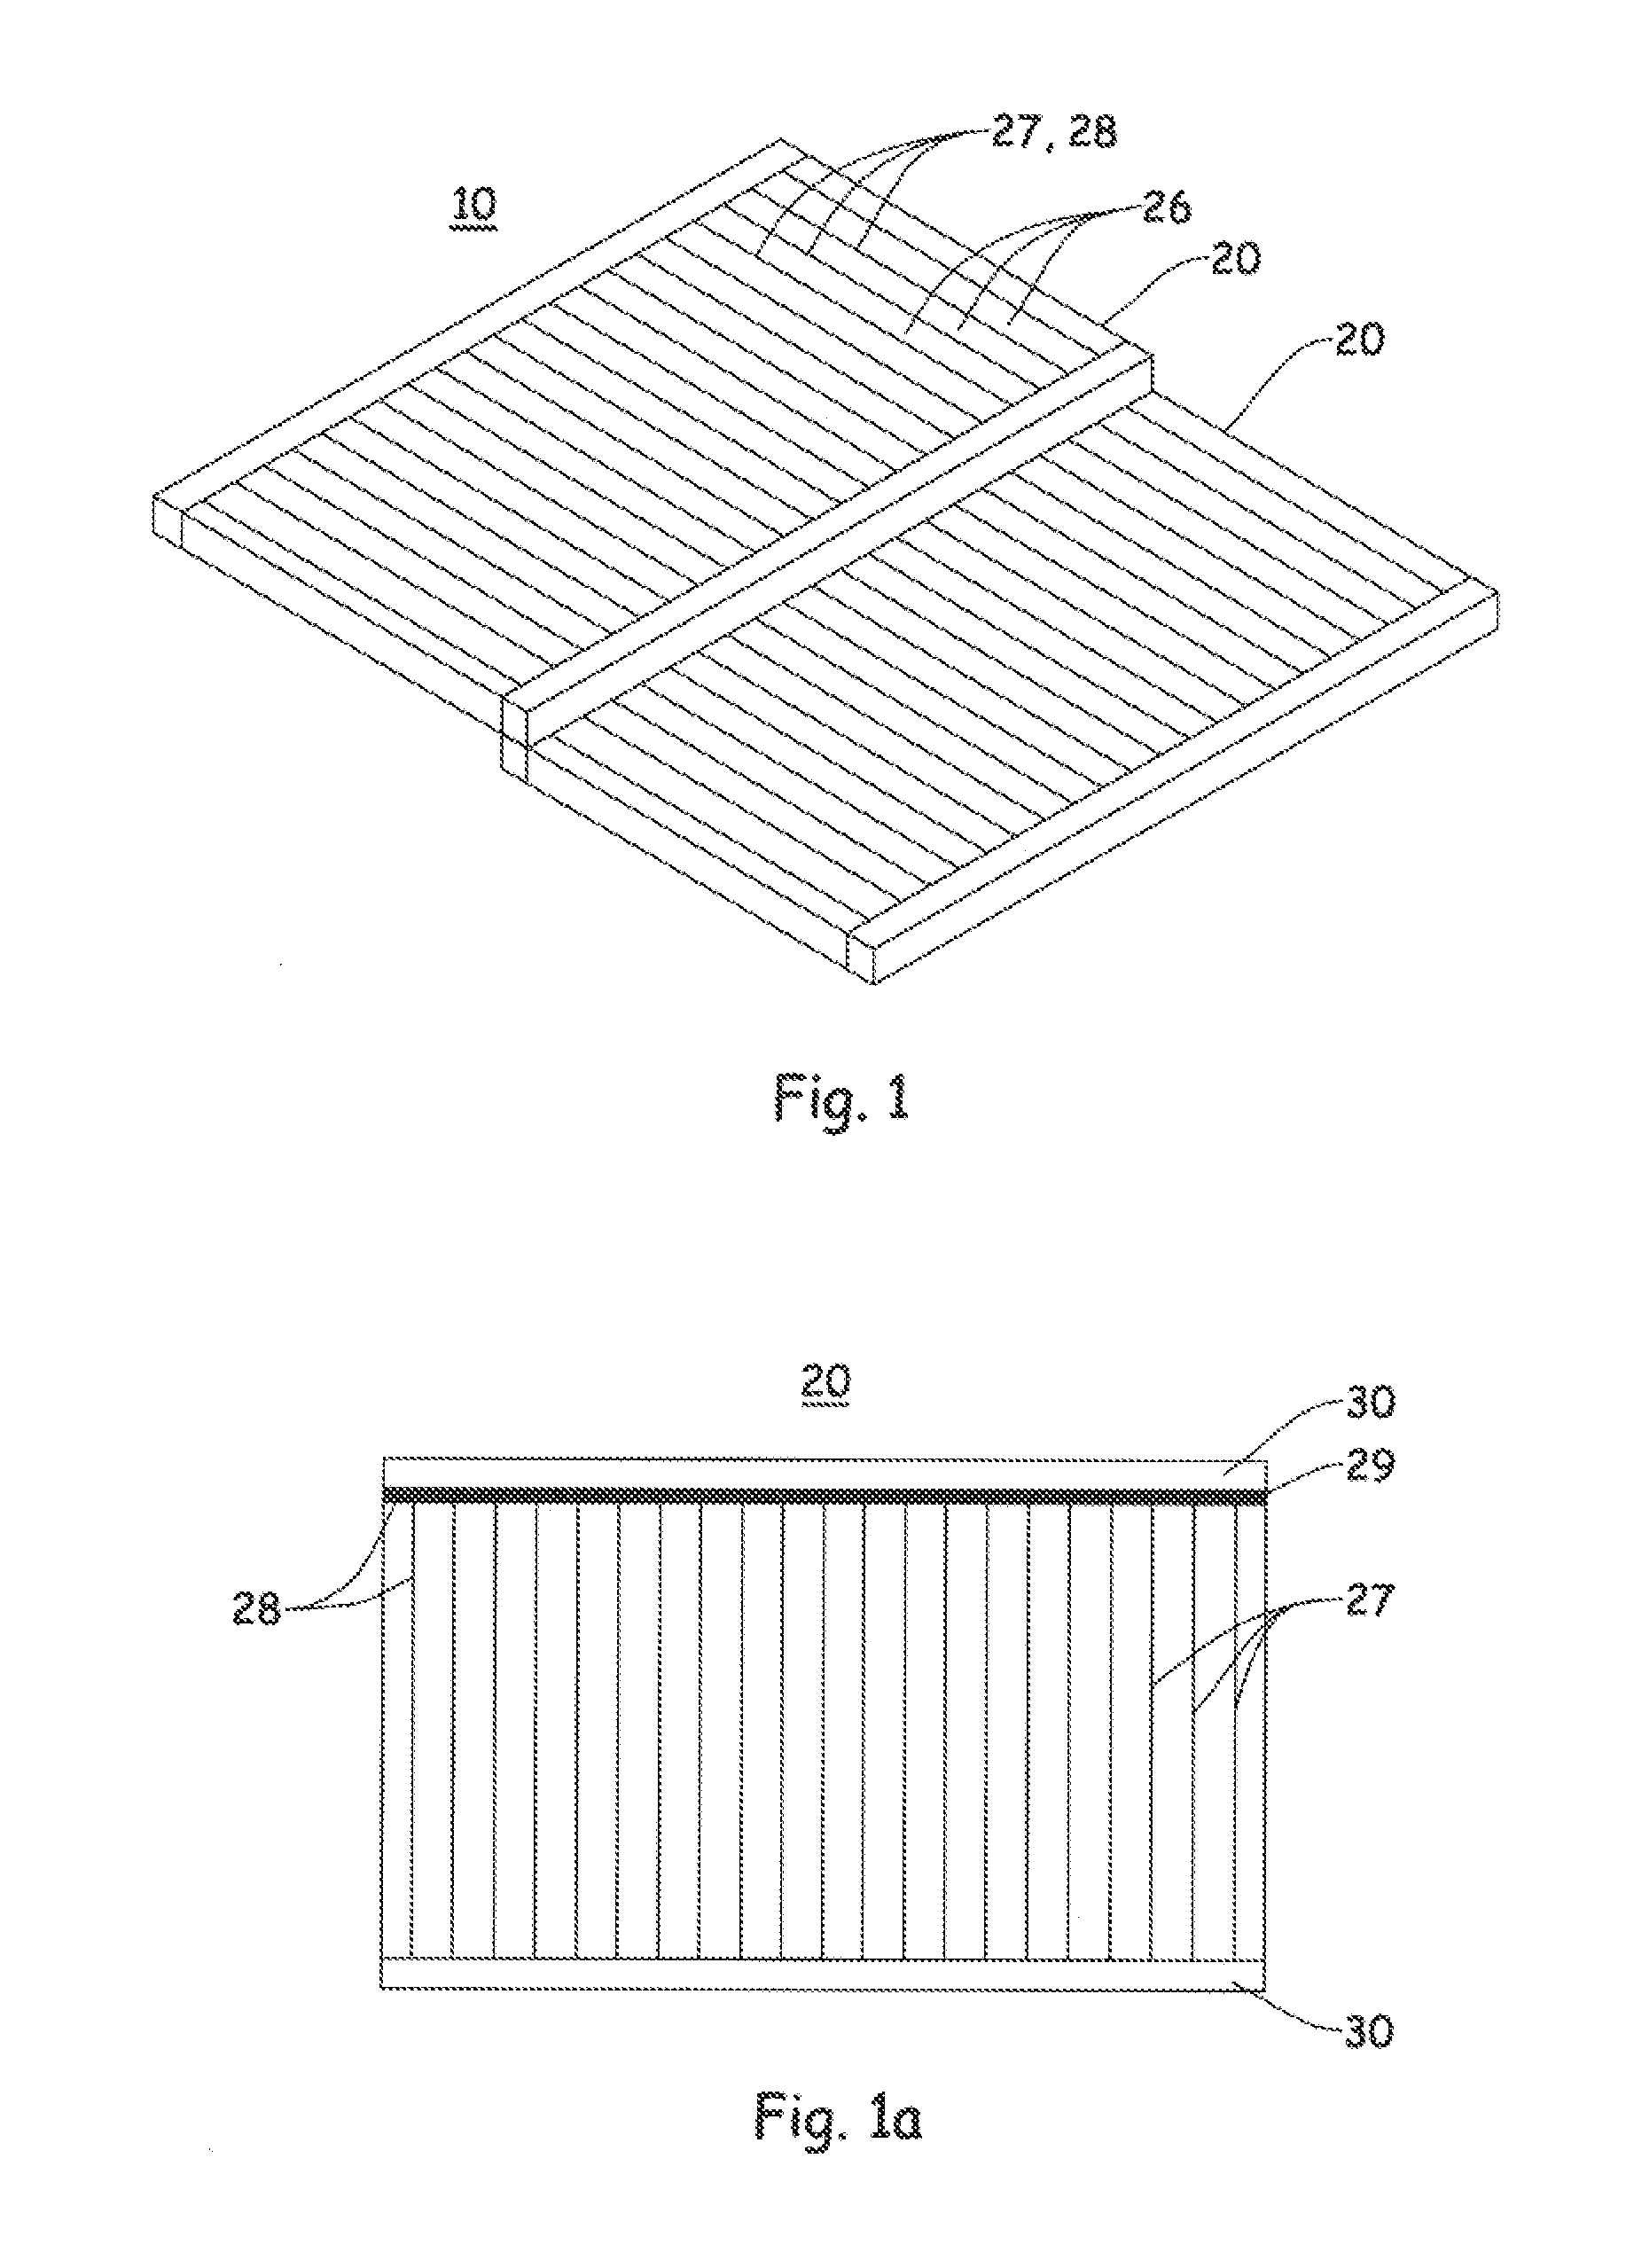 Photovoltaic cell assembly